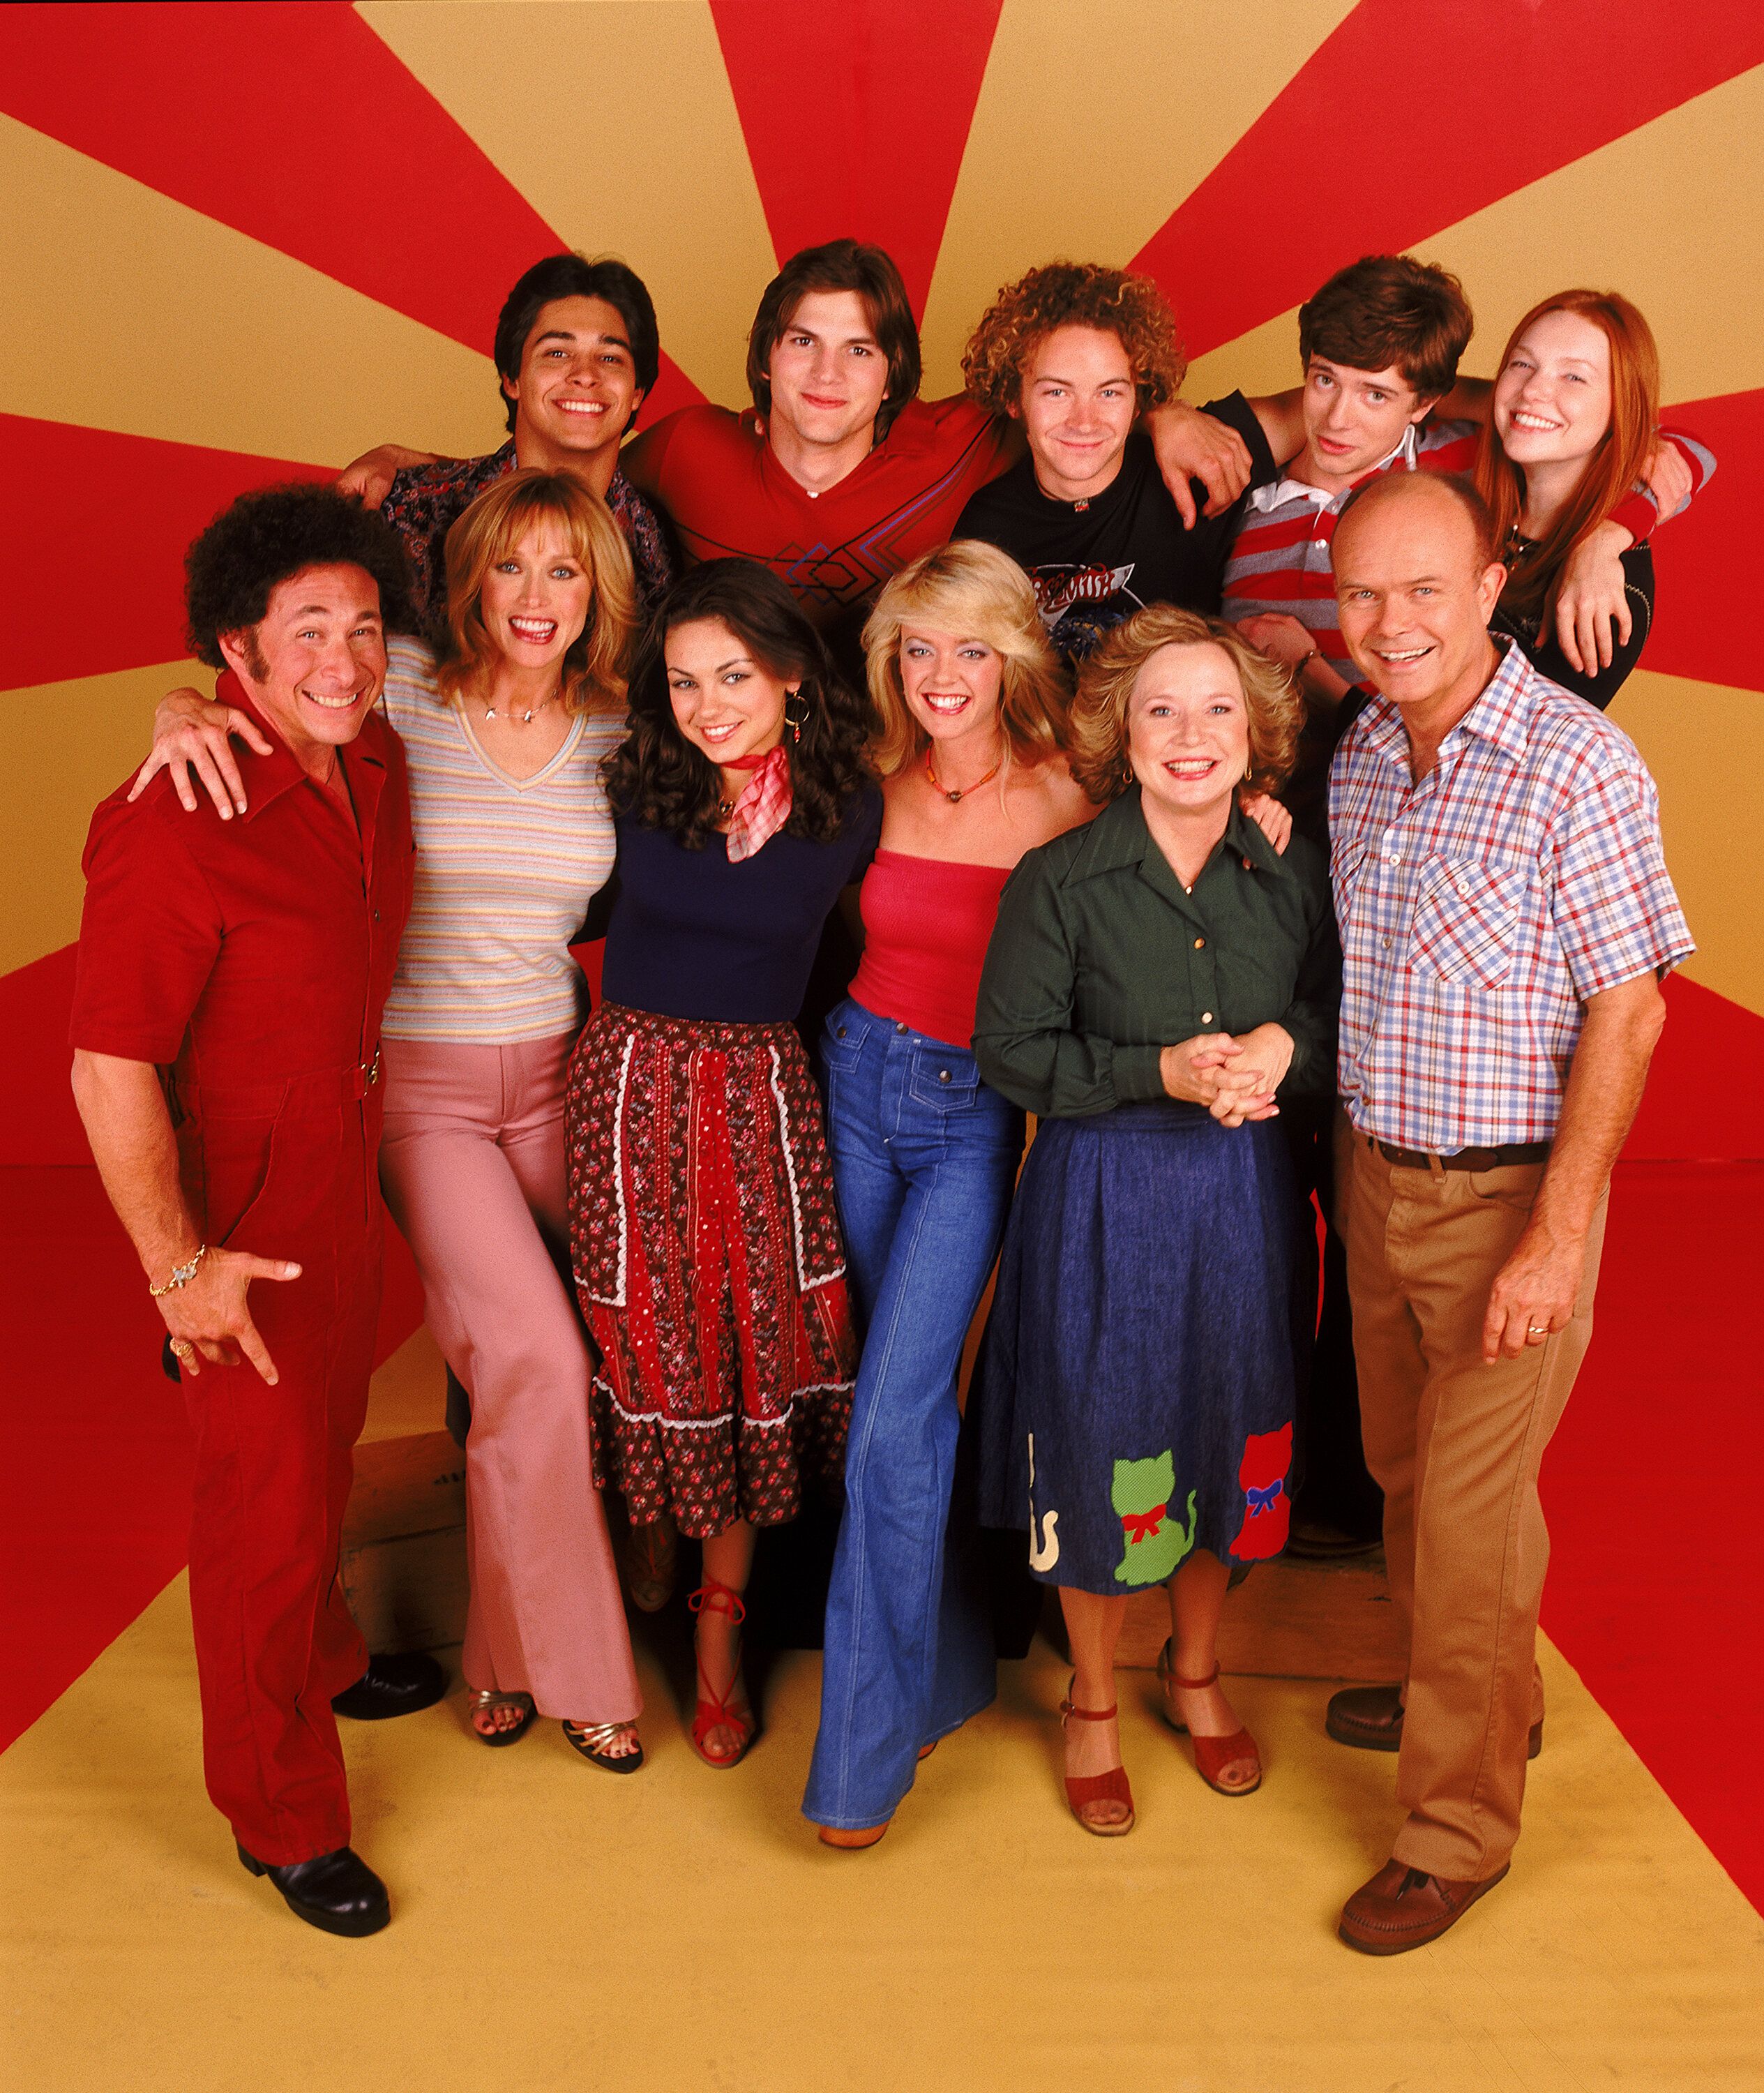 All the That '70s Show spin-offs you had no idea existed